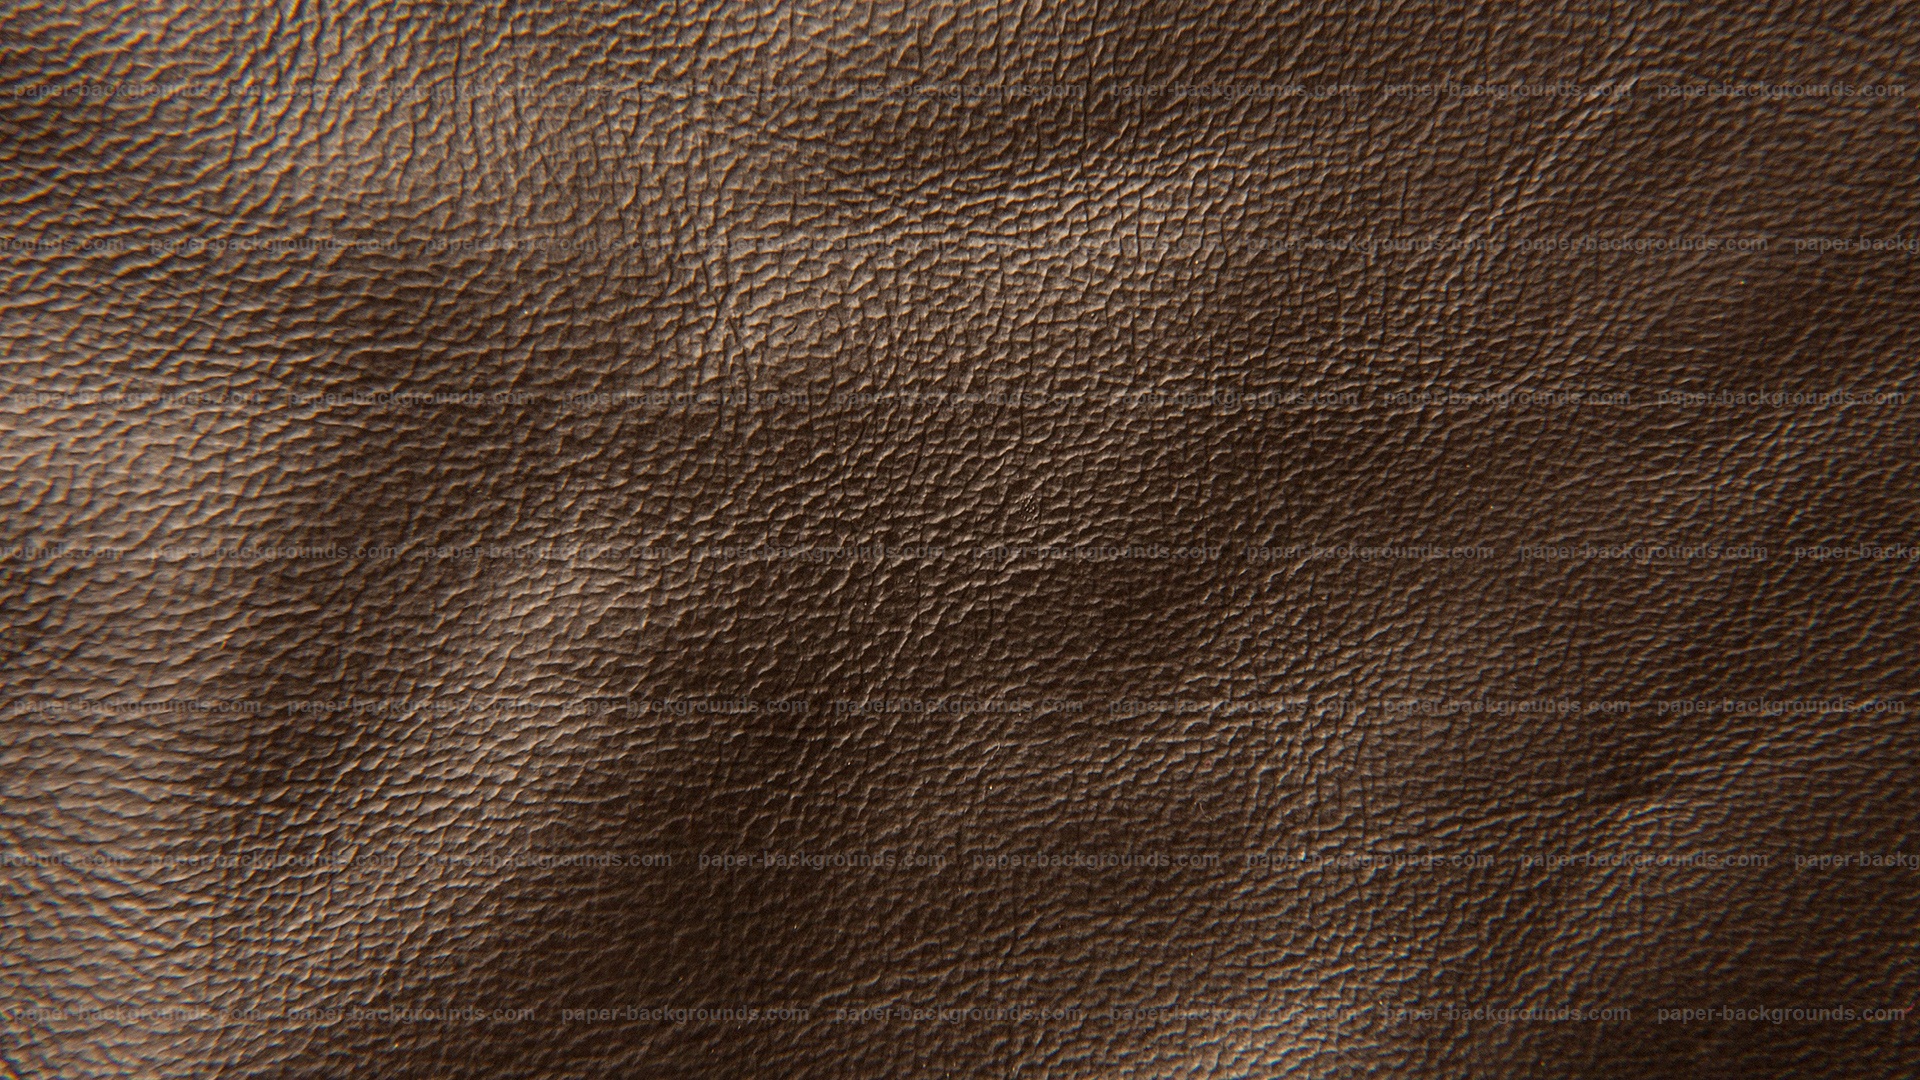 Dark Brown Leather Texture HD Paper Backgrounds